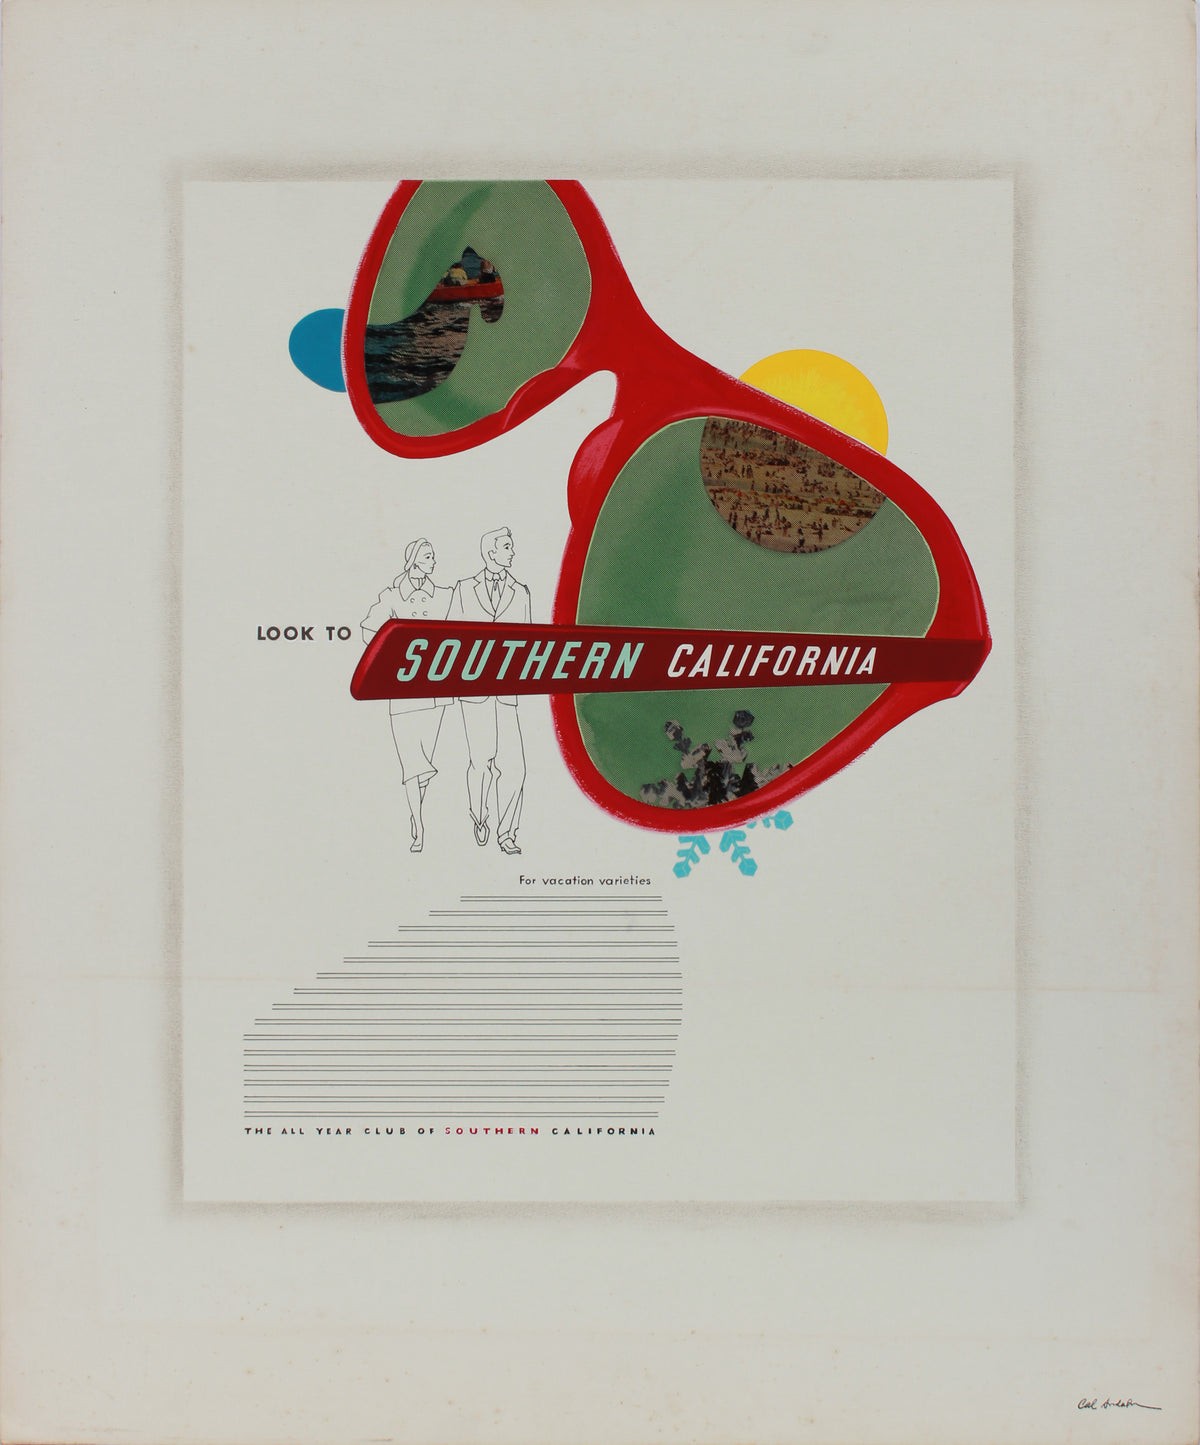 &lt;i&gt;Look to Southern California&lt;/i&gt; &lt;br&gt;1950-60s Mixed Media and Collage &lt;br&gt;&lt;br&gt;#B0164